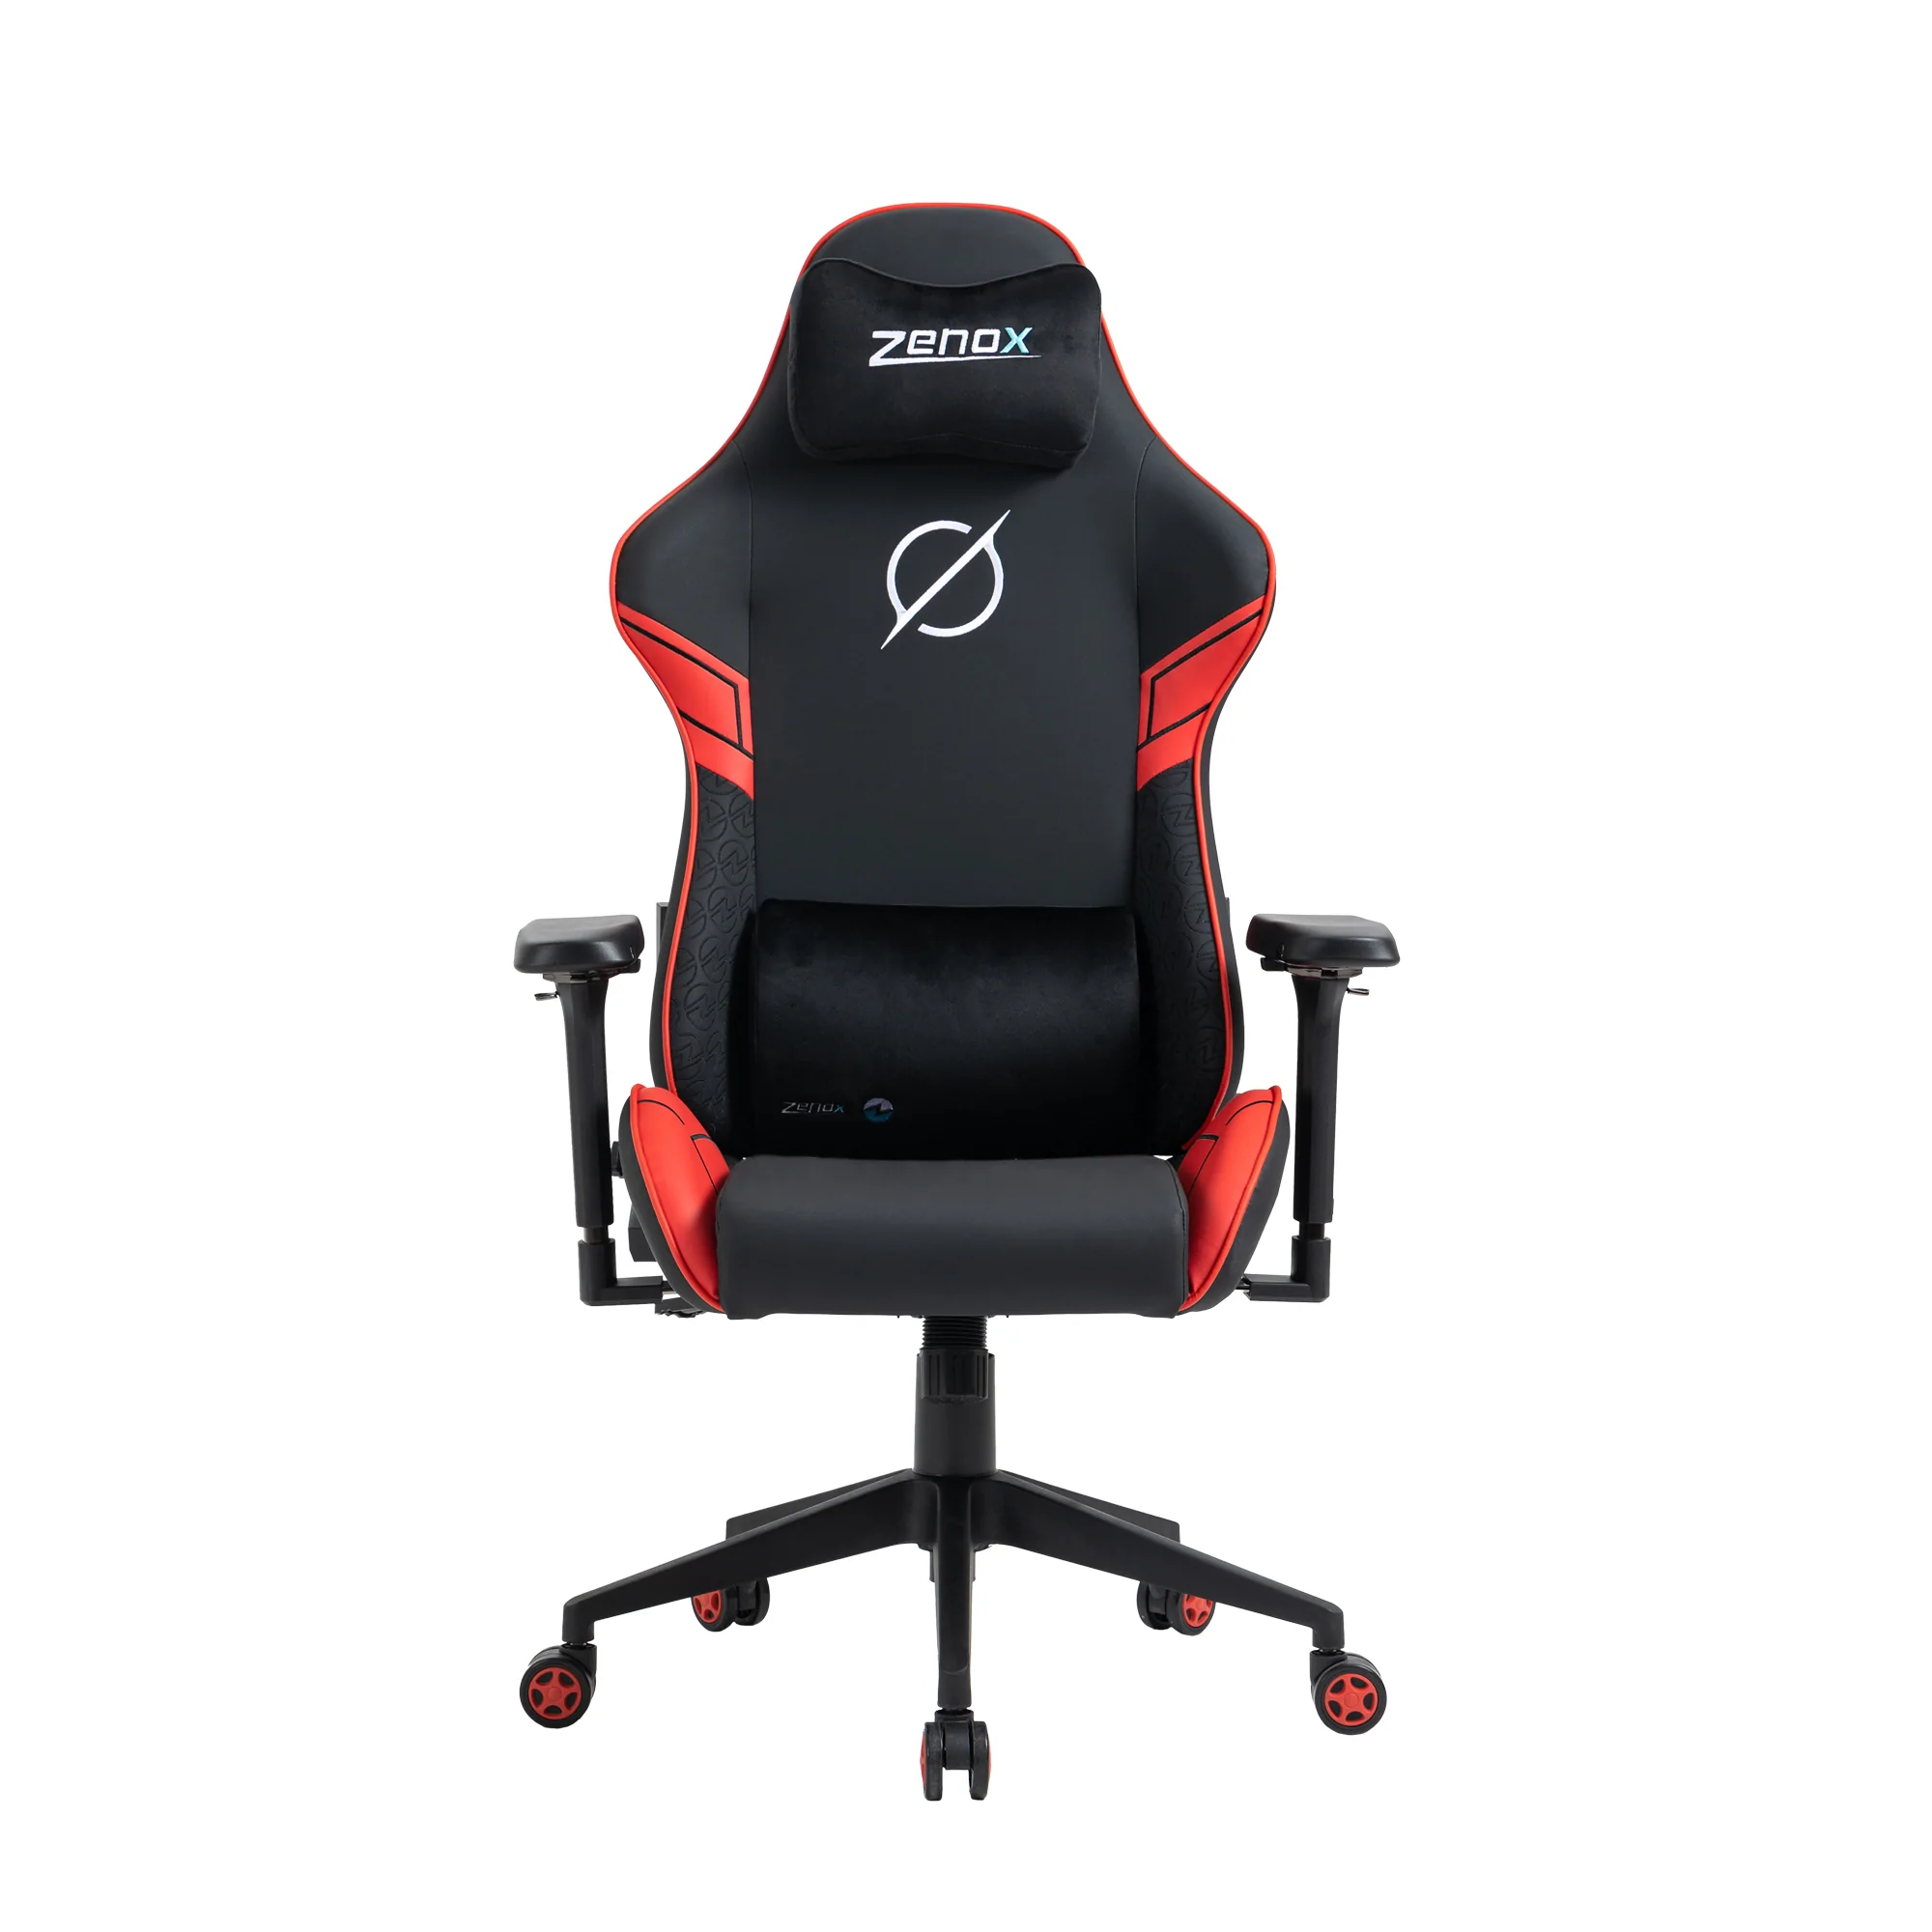 Zenox Saturn-MK2 Gaming Chair (Leather/Red)